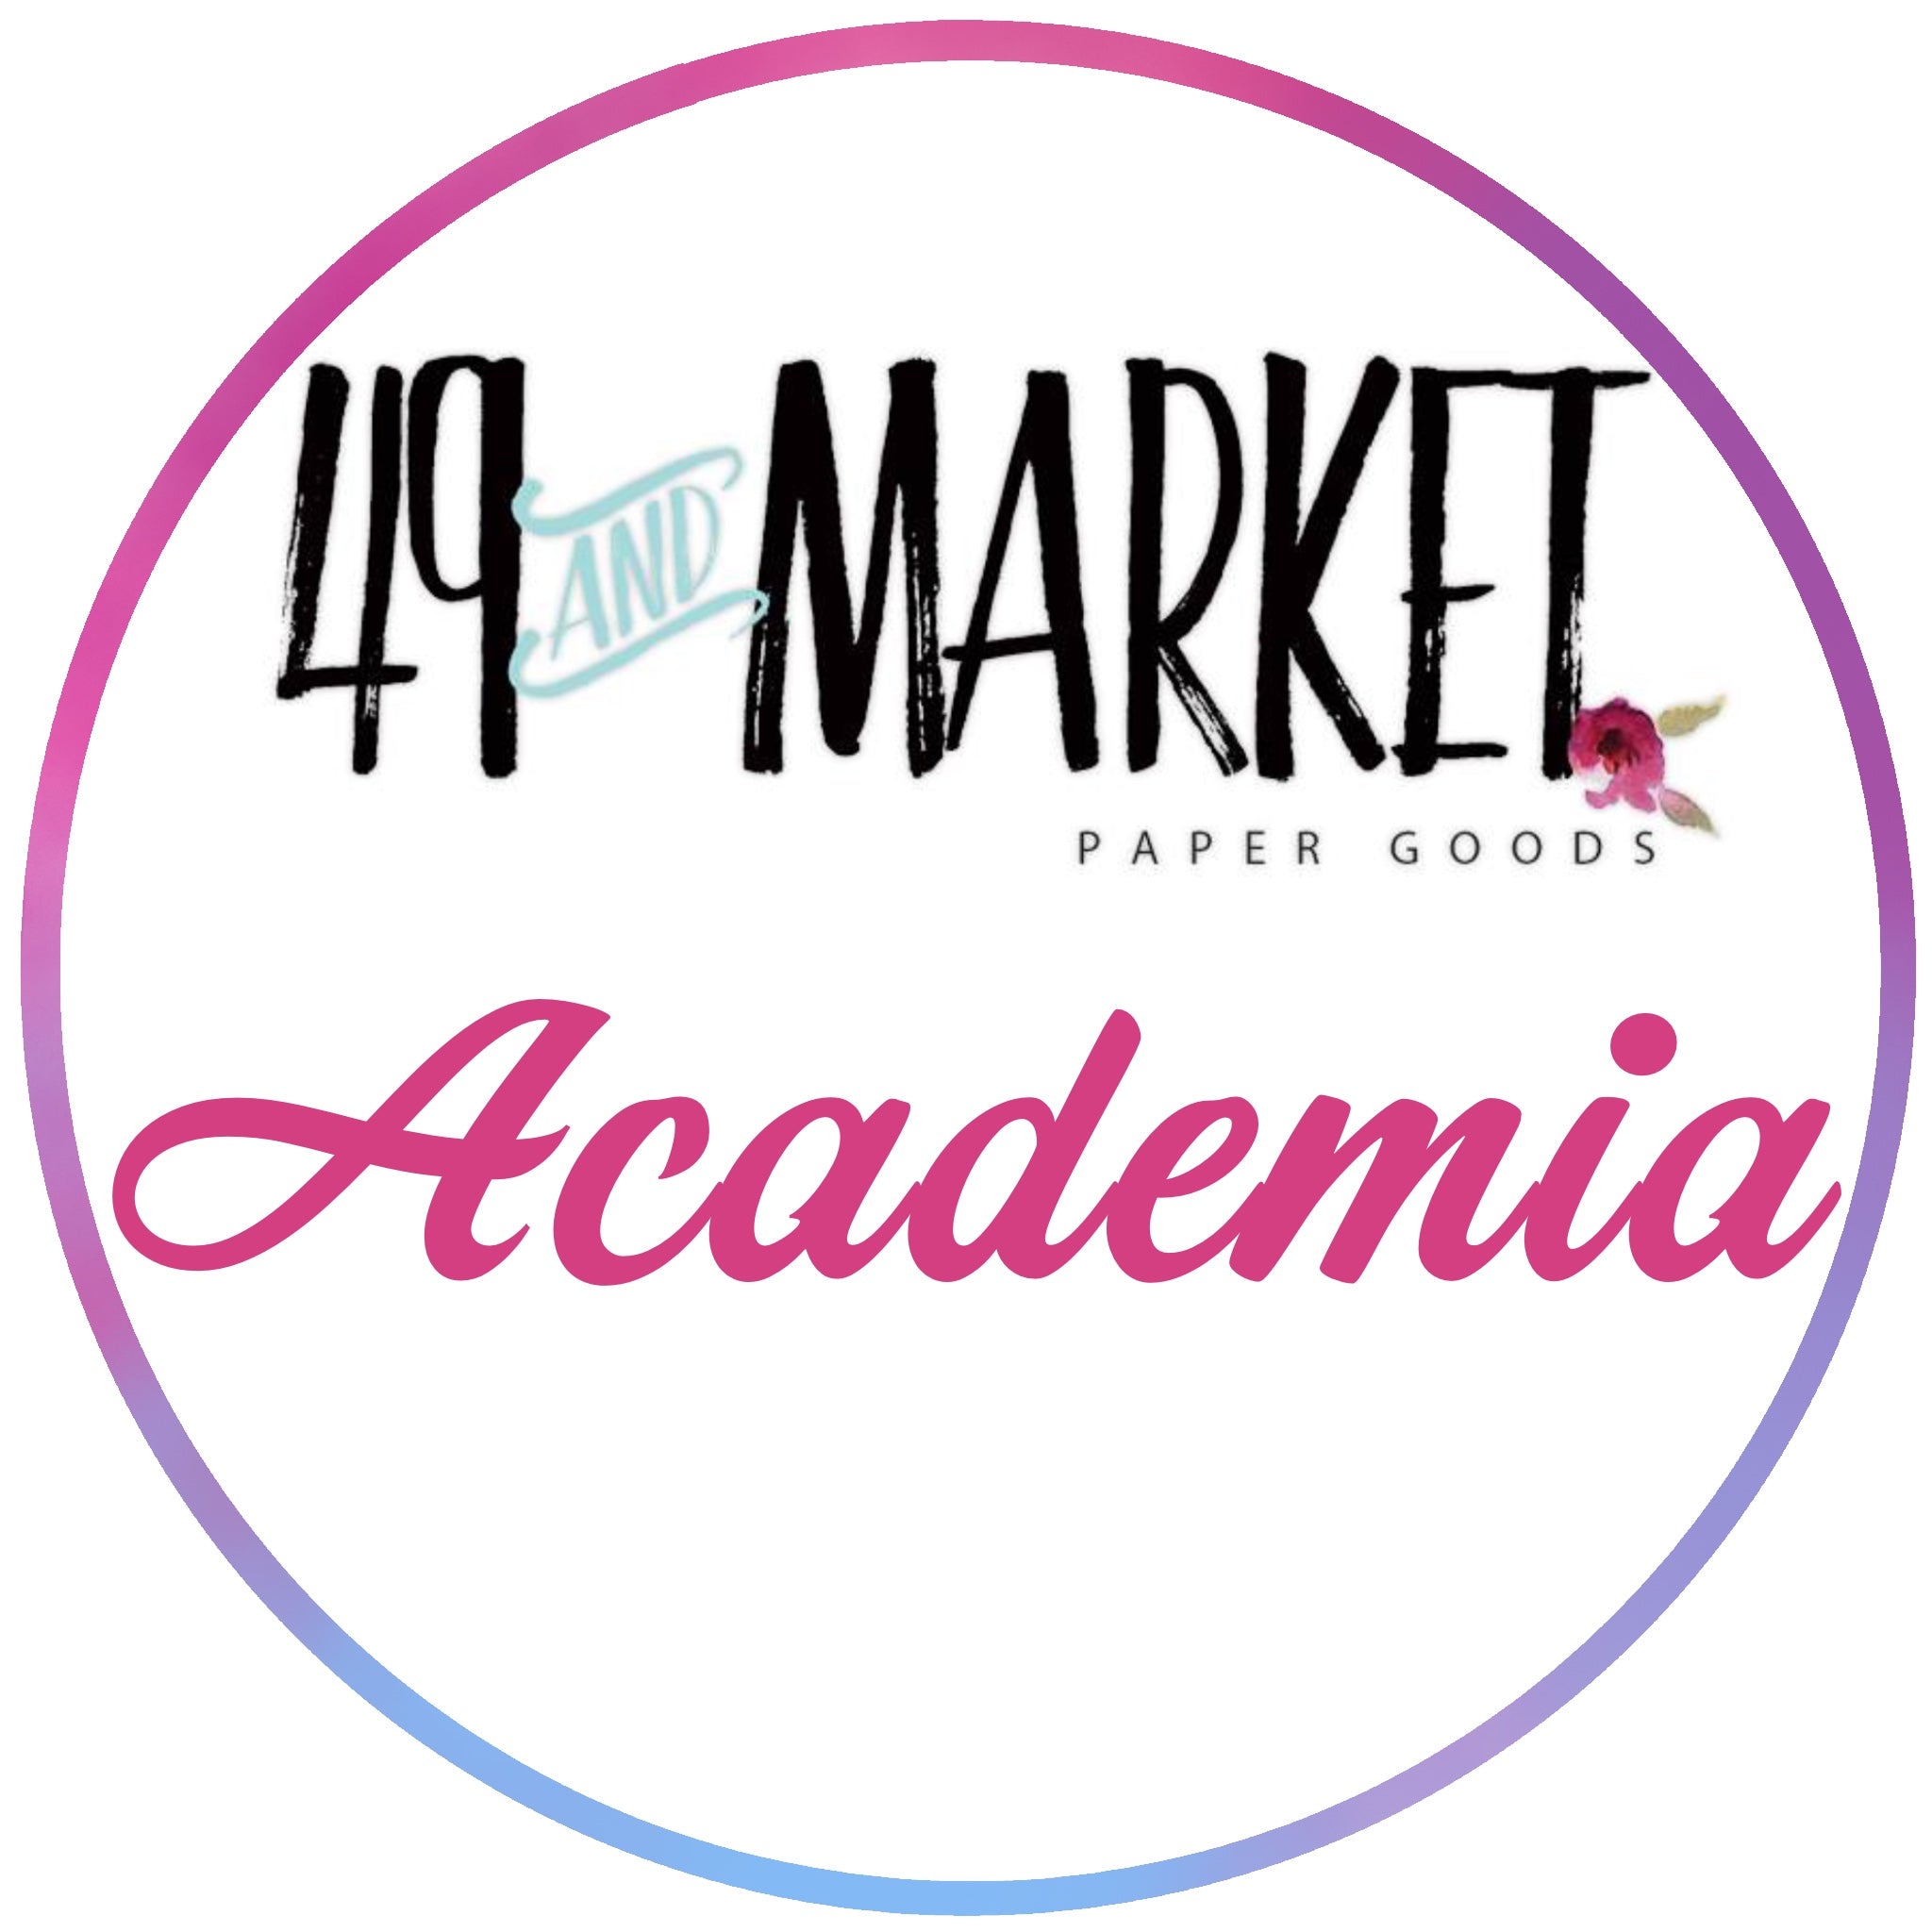 BUY IT ALL: 49 & Market Academia Collection